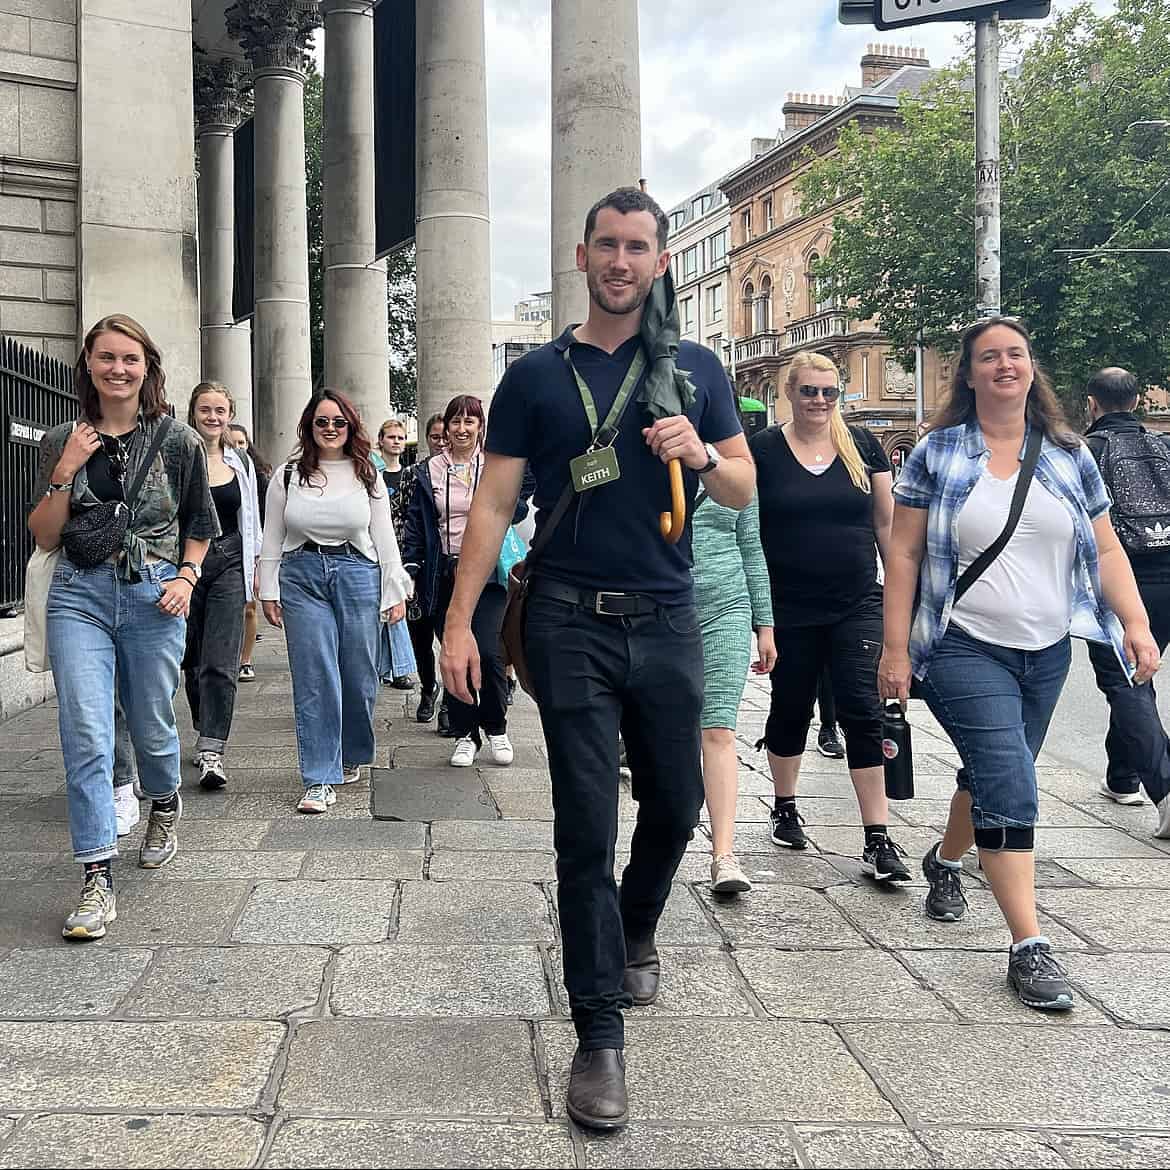 Dublin tour guide leads group past Old Parliament building on College Green.